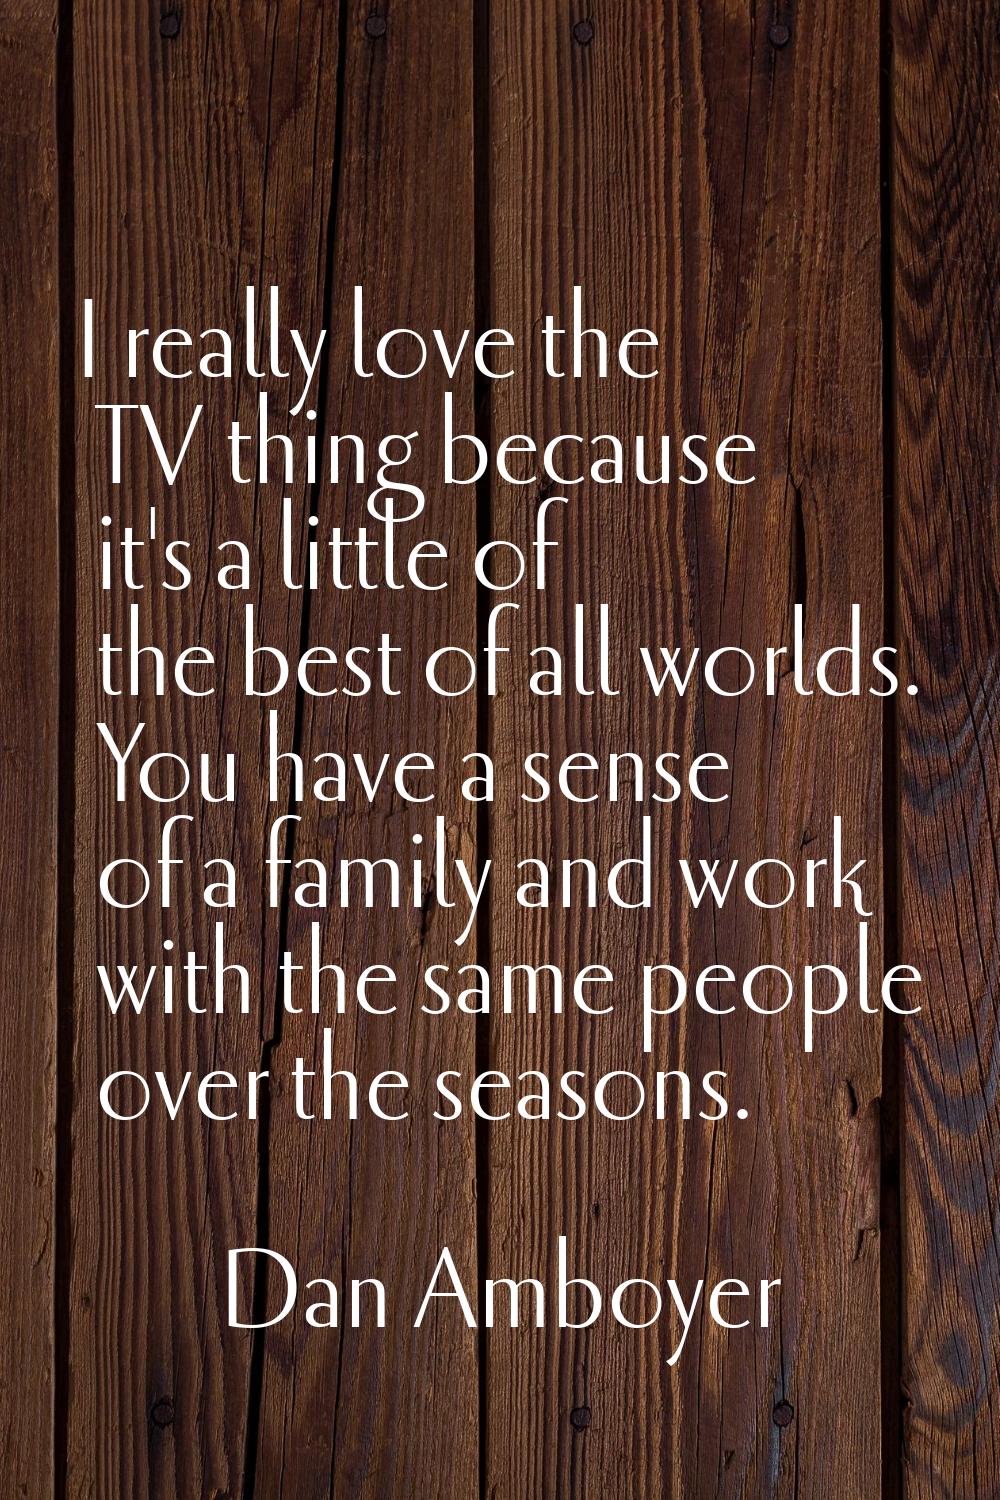 I really love the TV thing because it's a little of the best of all worlds. You have a sense of a f